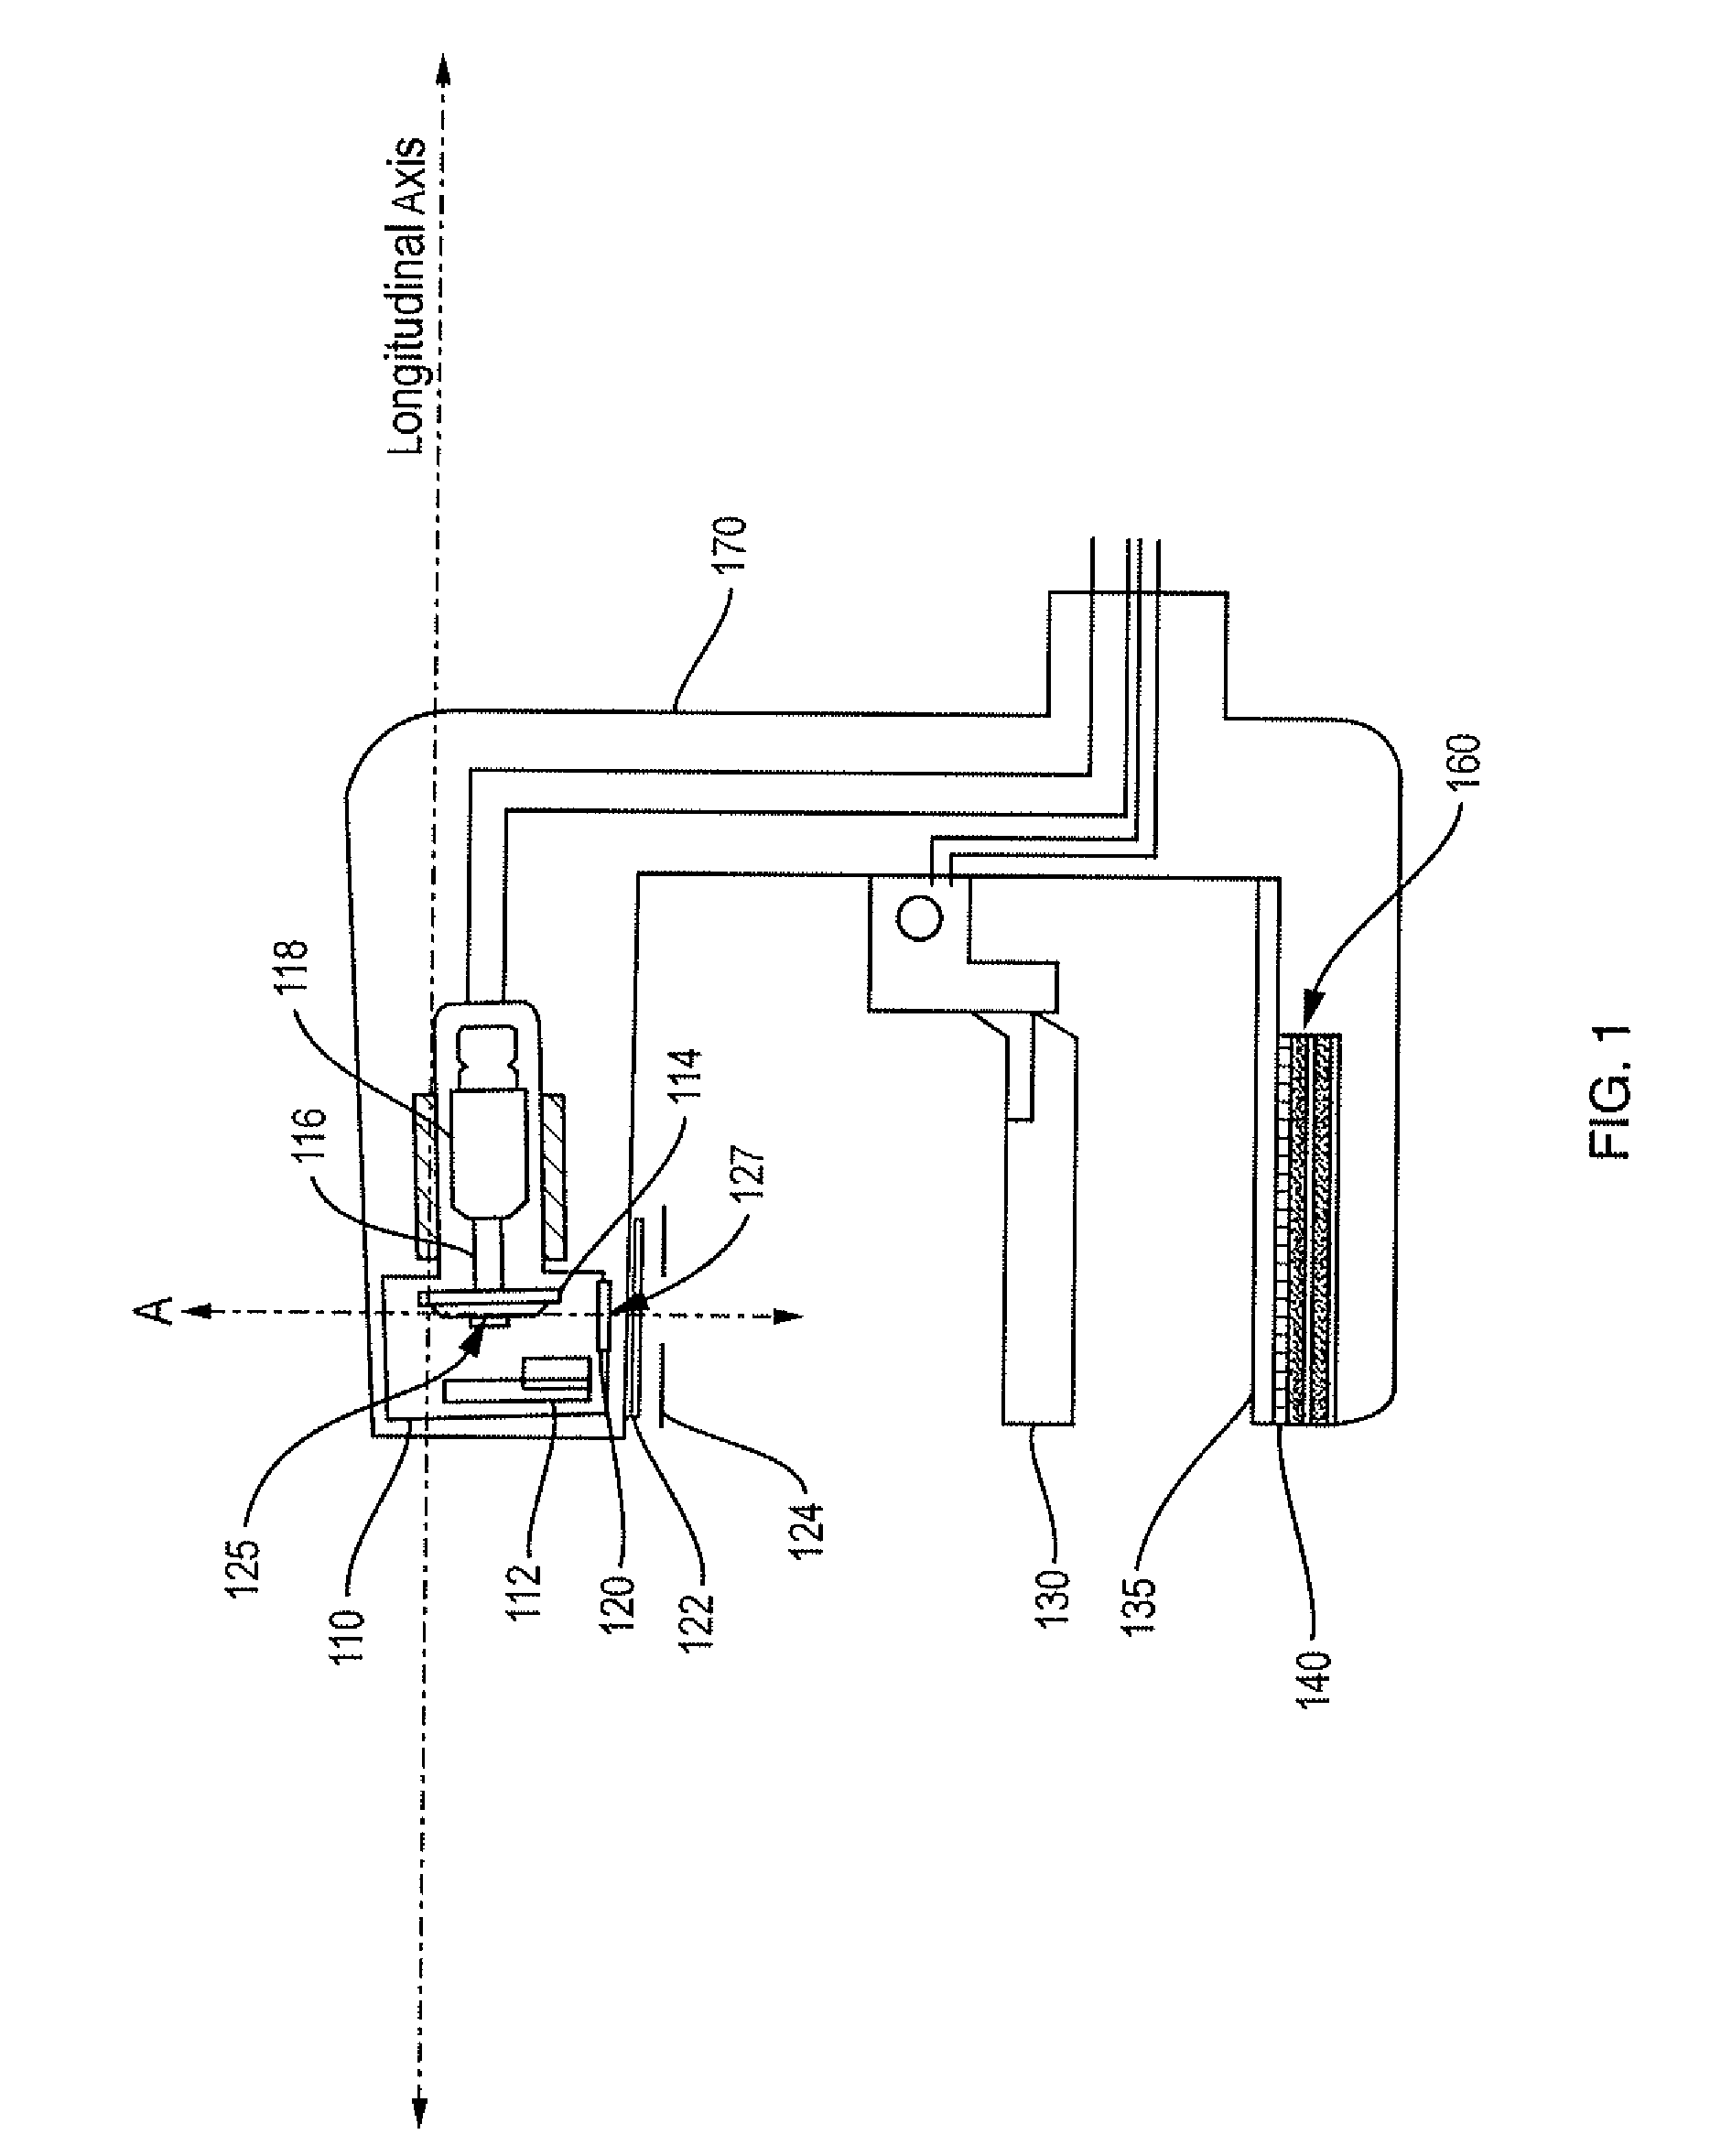 Method and system for controlling X-ray focal spot characteristics for tomosynthesis and mammography imaging